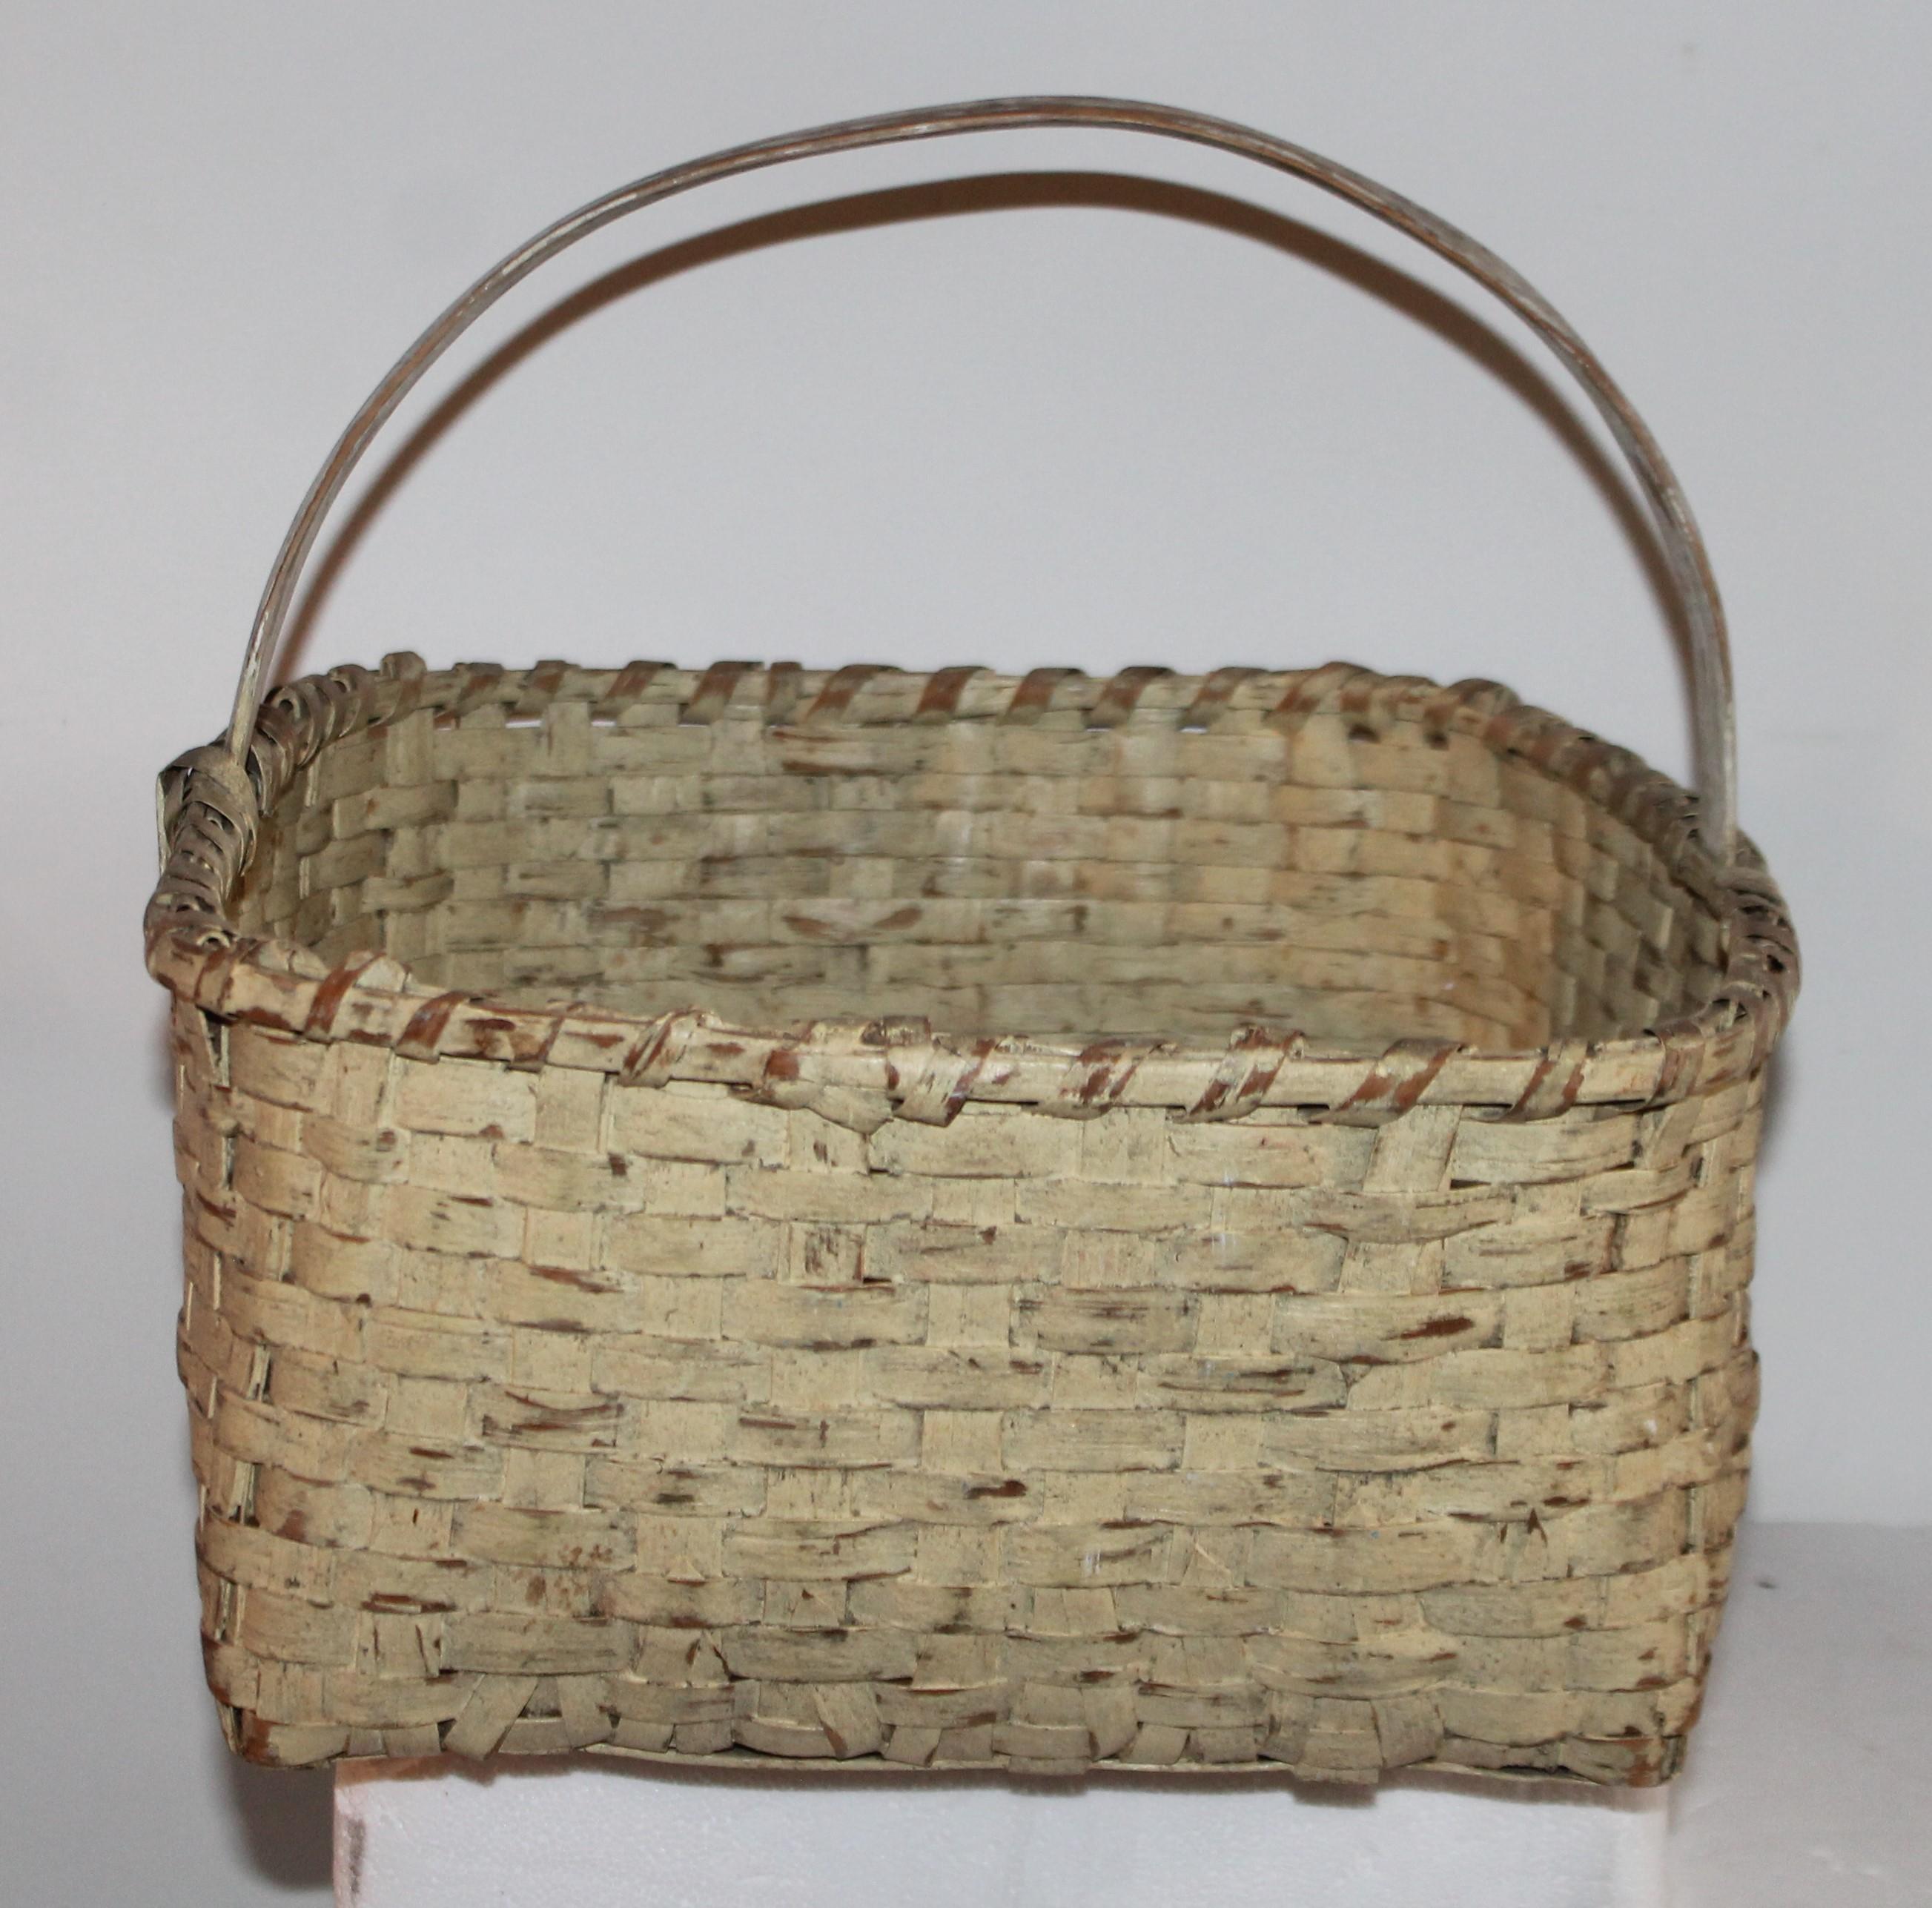 19th century original creamy yellow painted gathering basket from New England. This fine folky basket has the original cream painted handle and yellow bottom.